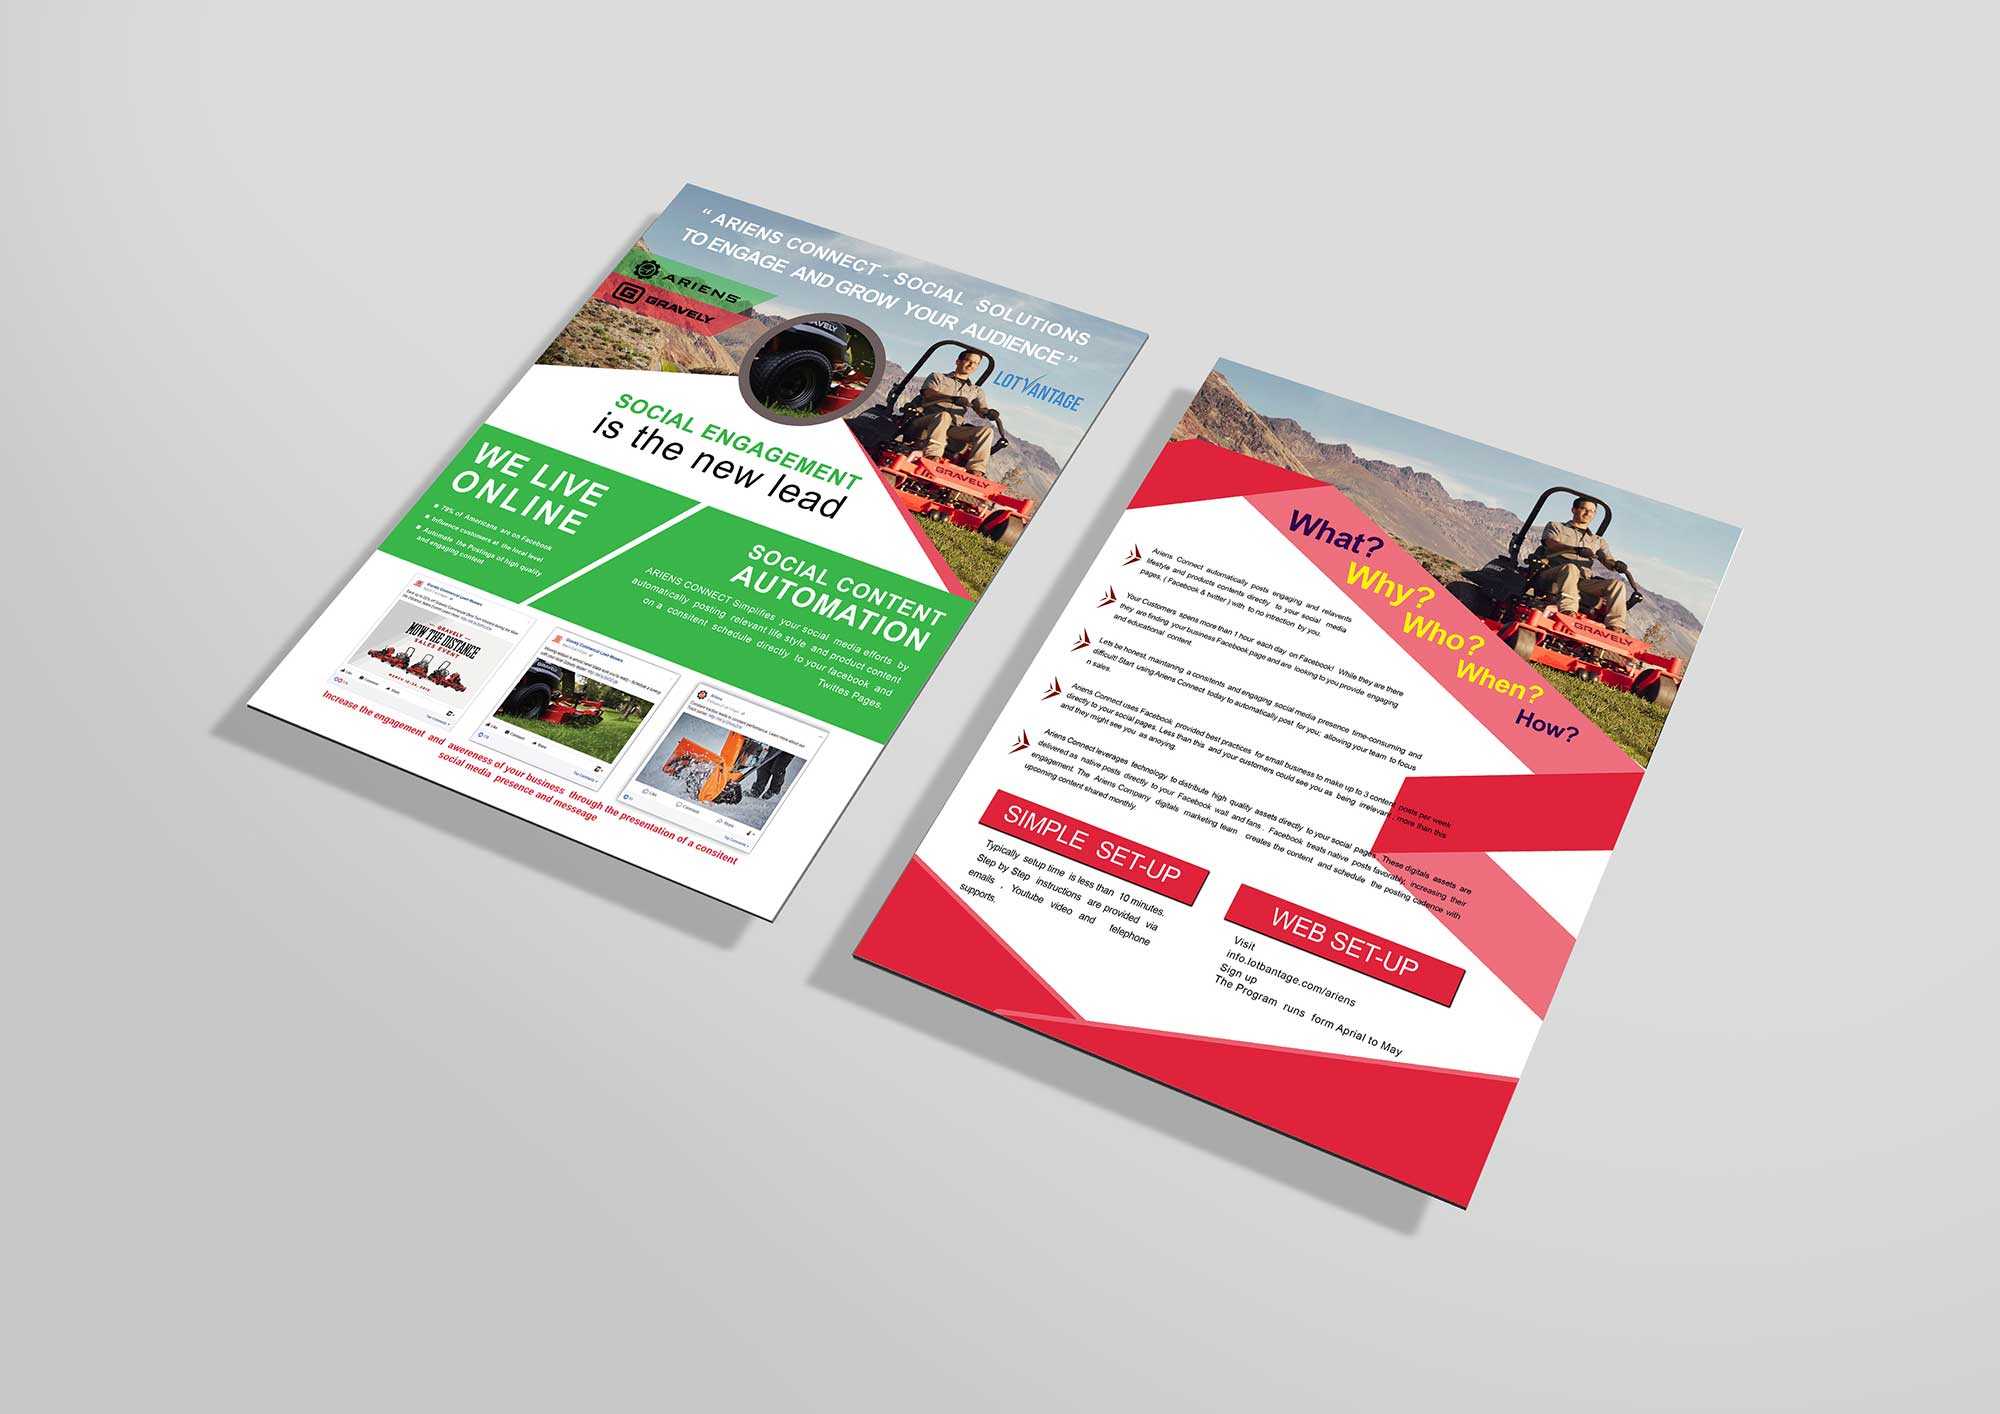 Free Social Engagement Psd Flyer Template | Free Psd Mockup Throughout Social Media Brochure Template